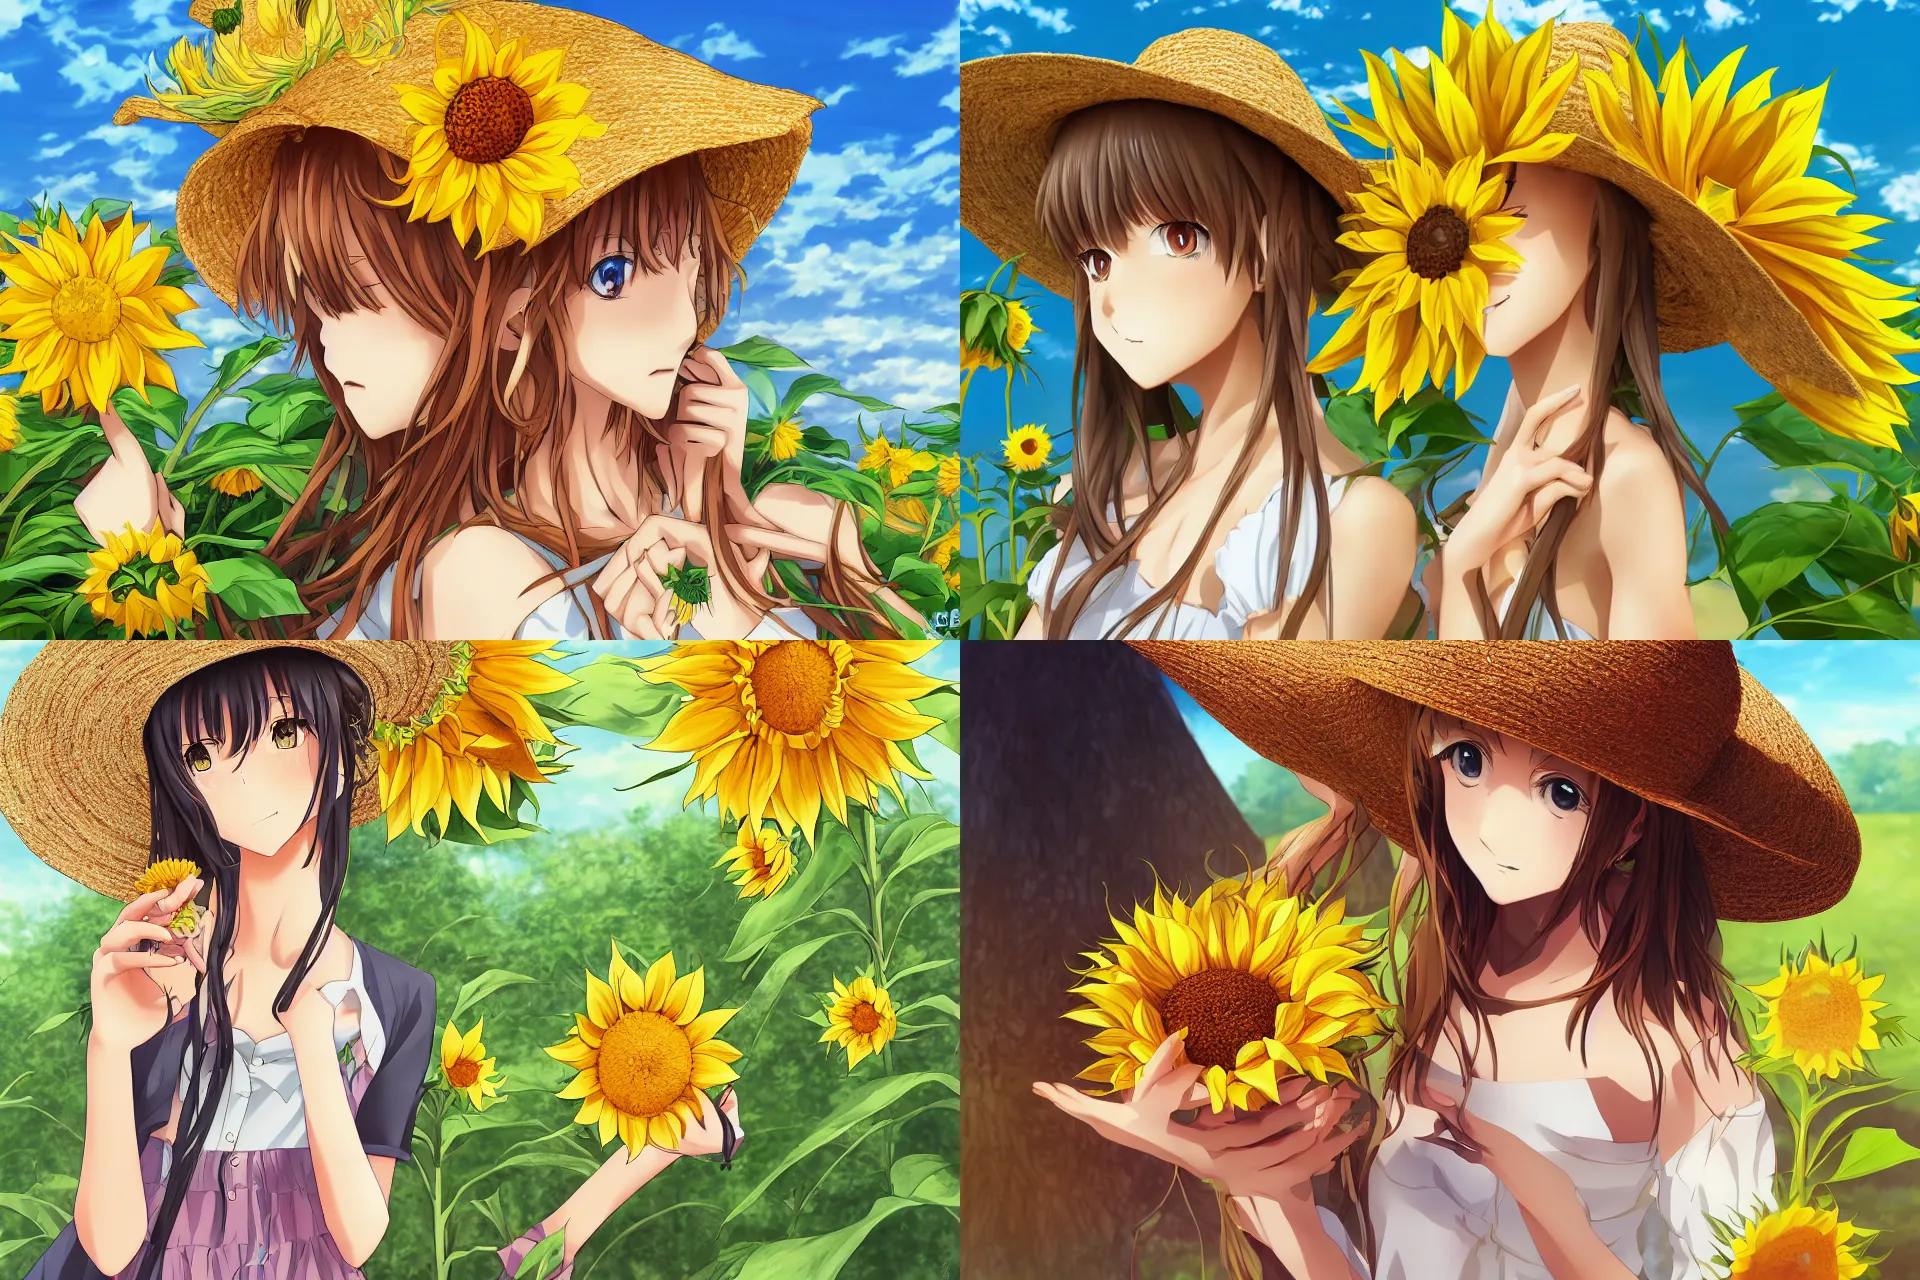 Anime girl with sunflower and - SeaArt AI